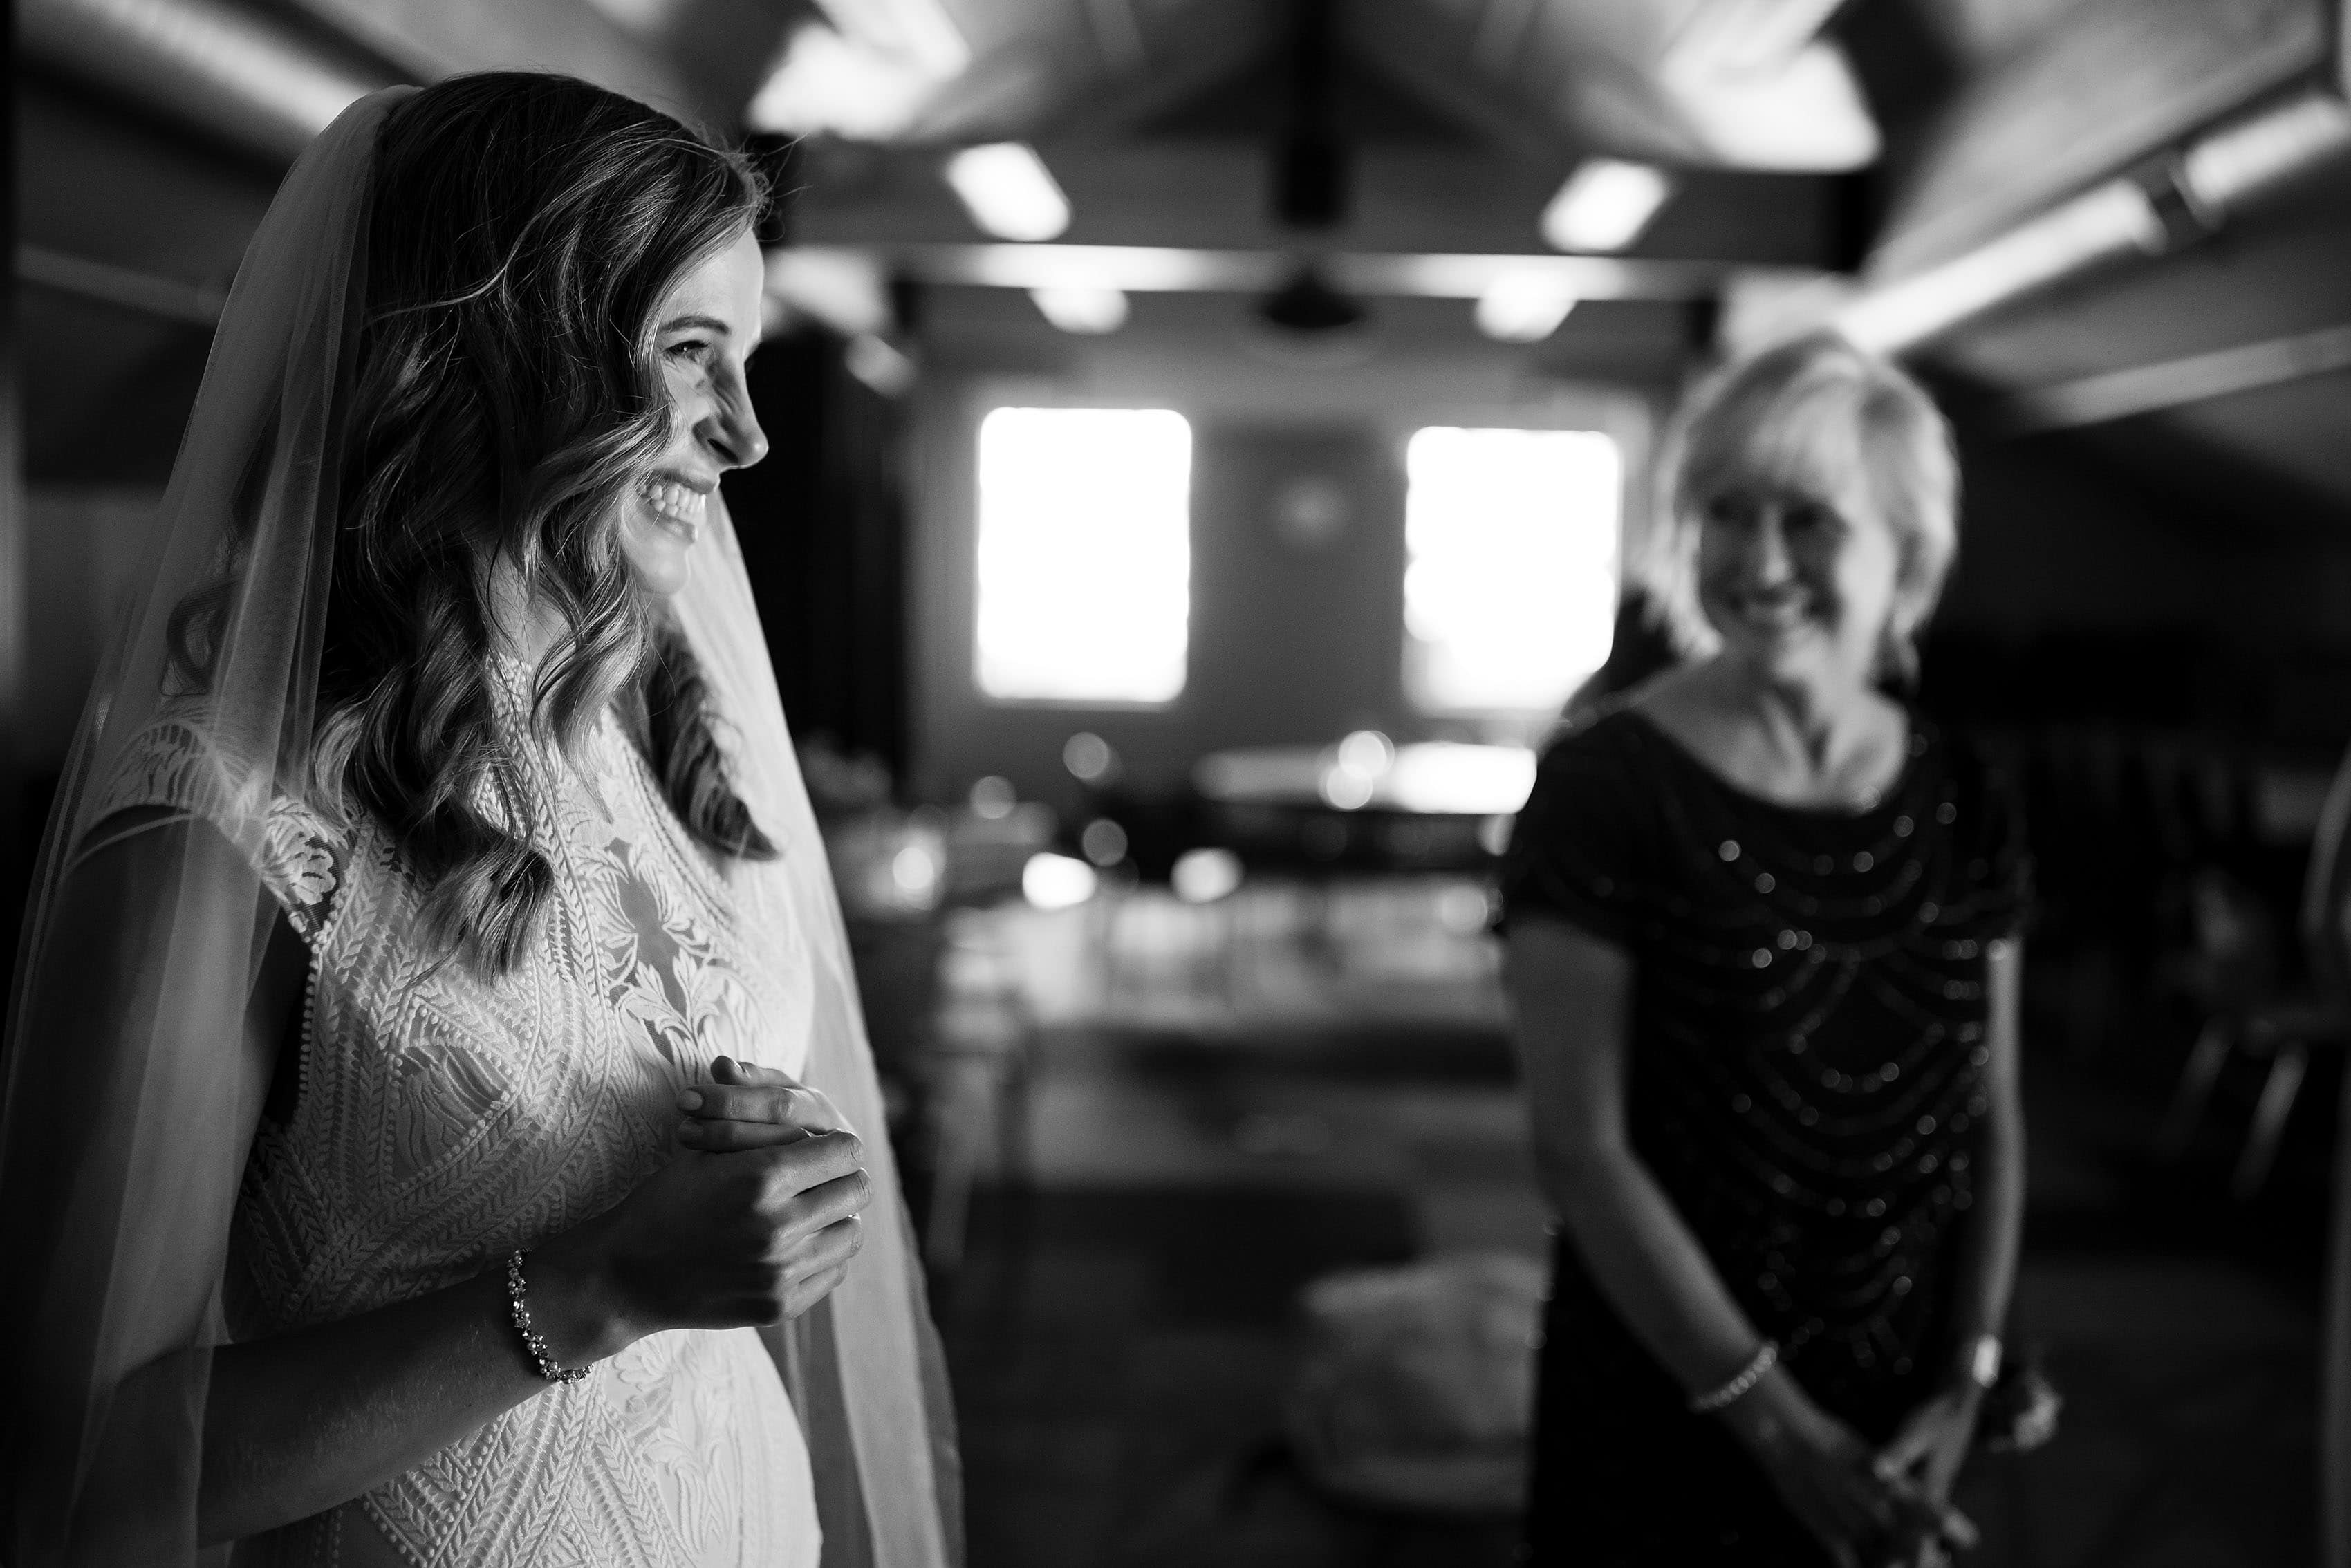 The bride smiles as her mother looks on